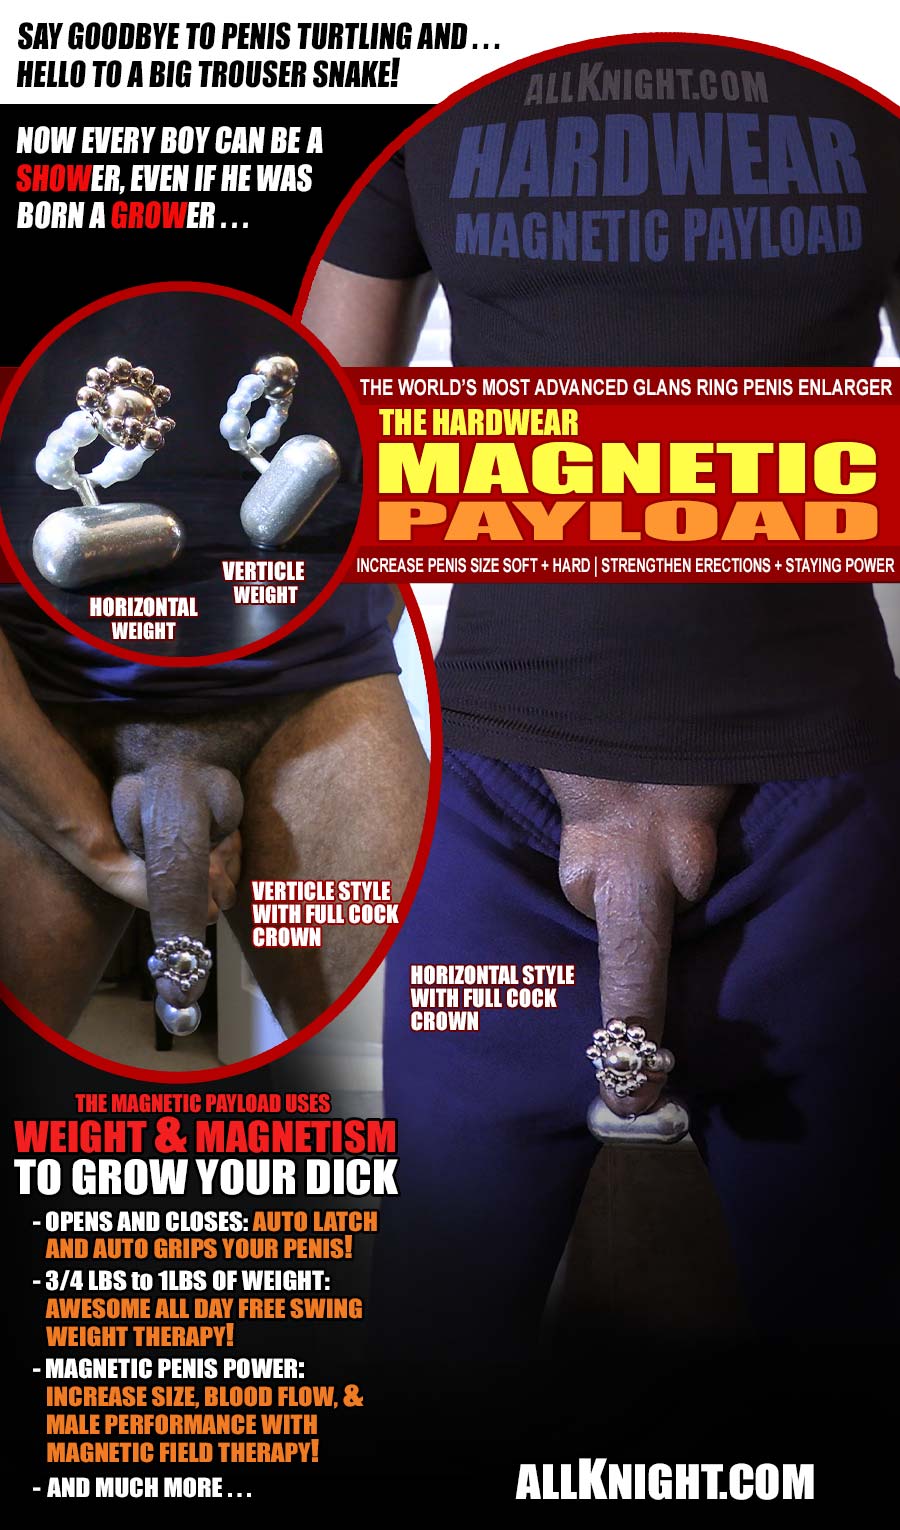 You&rsquo;ll want to flop your big soft cock over the waistband of your sweats too. Just to stare in raw amazement as the magnetic therapy and weight enhancement combine in this weighted glans ring to give you a massive super pumped cock.